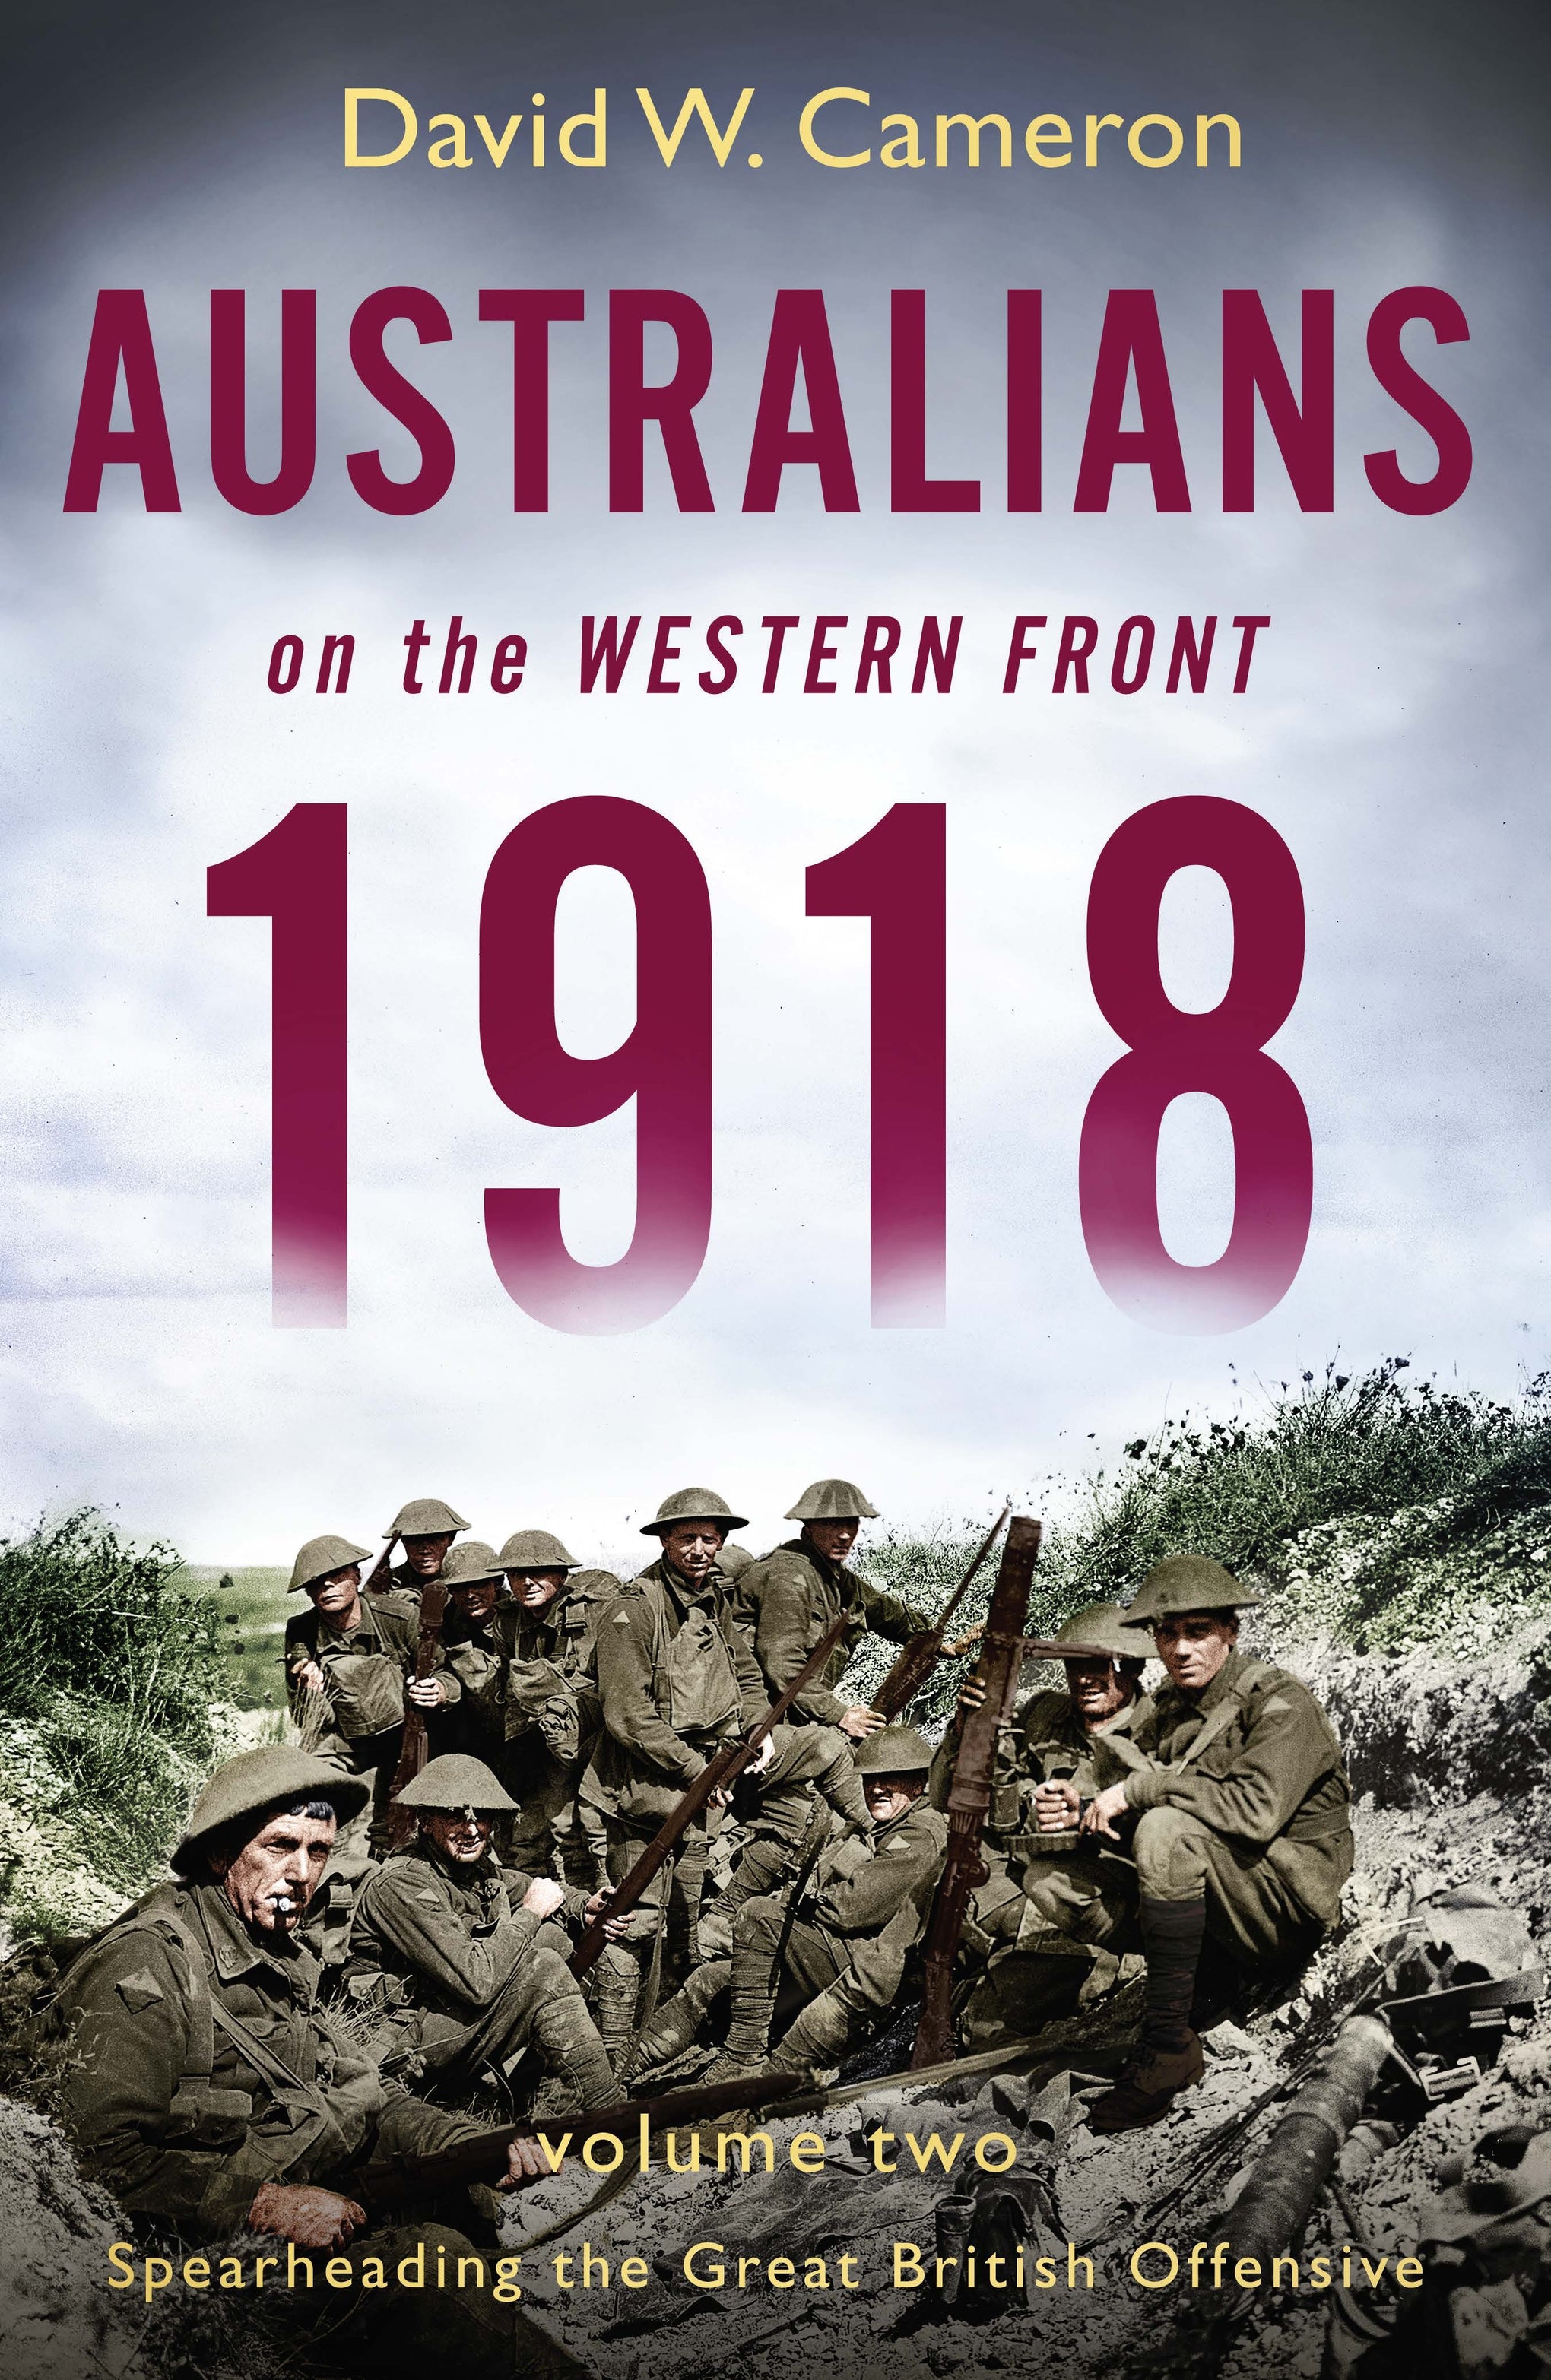 Australians on the Western Front 1918 (Vol. 2): Spearheading the Great British Offensive